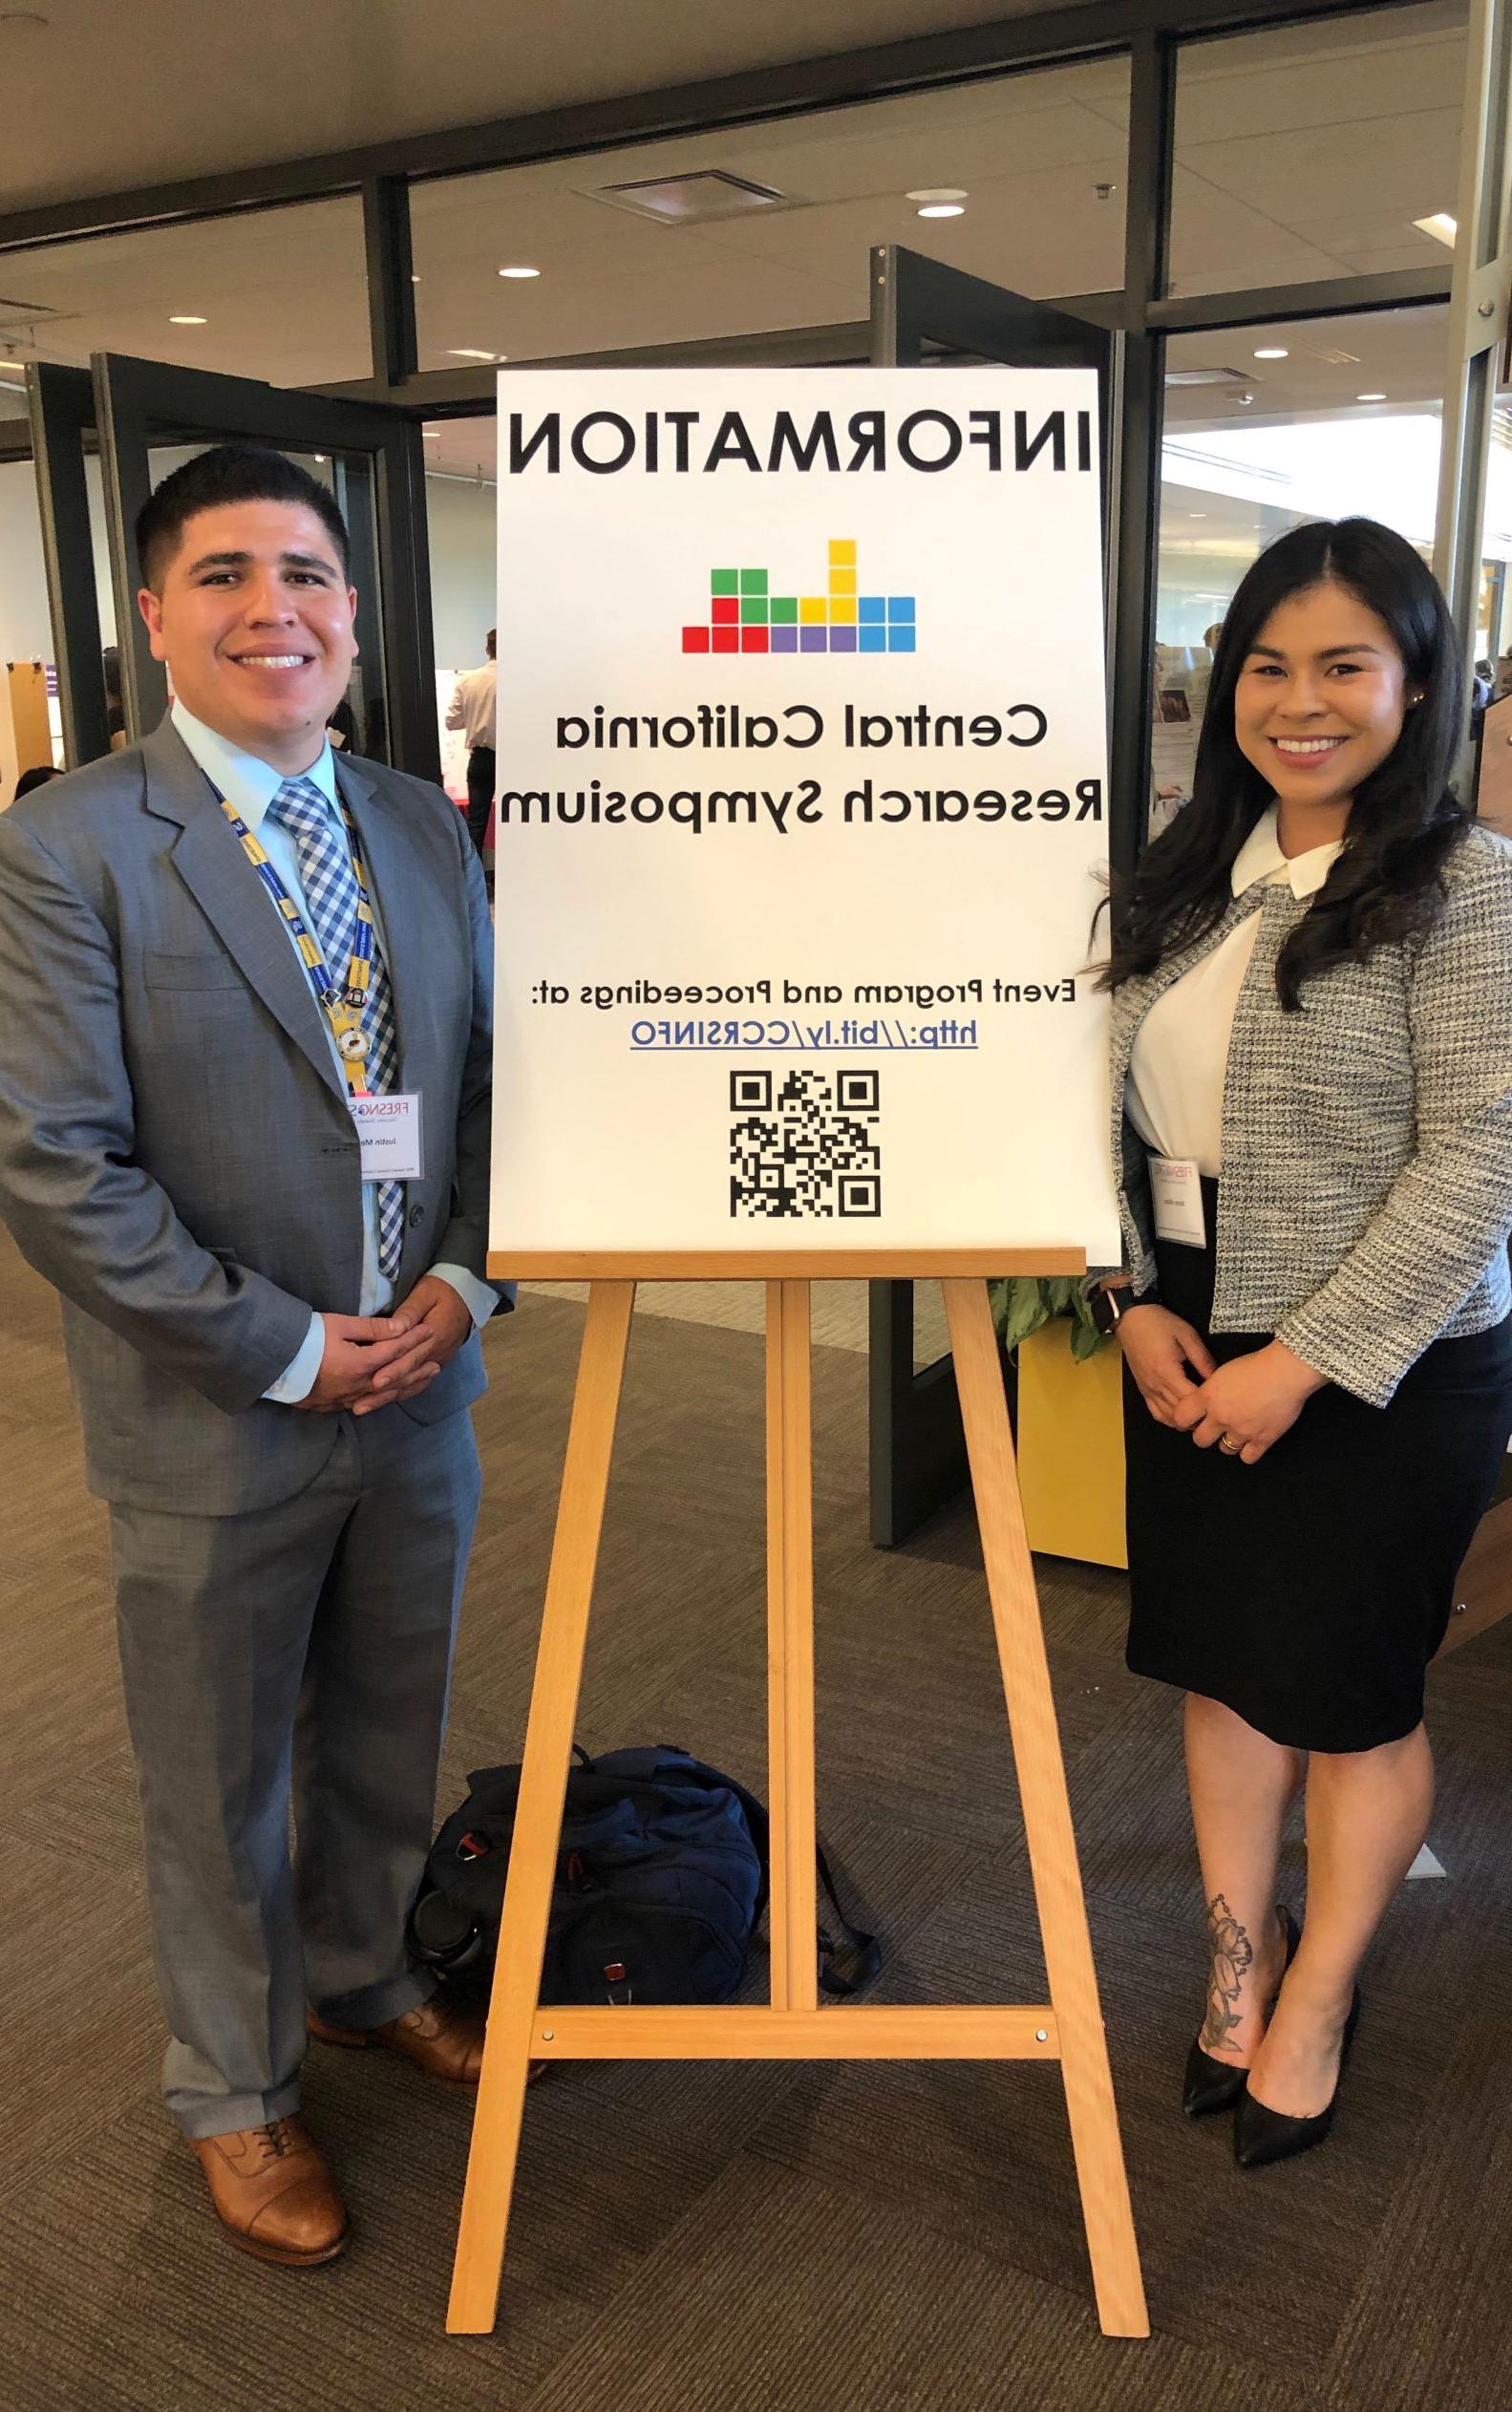 Two public health students at Central California Research Symposium